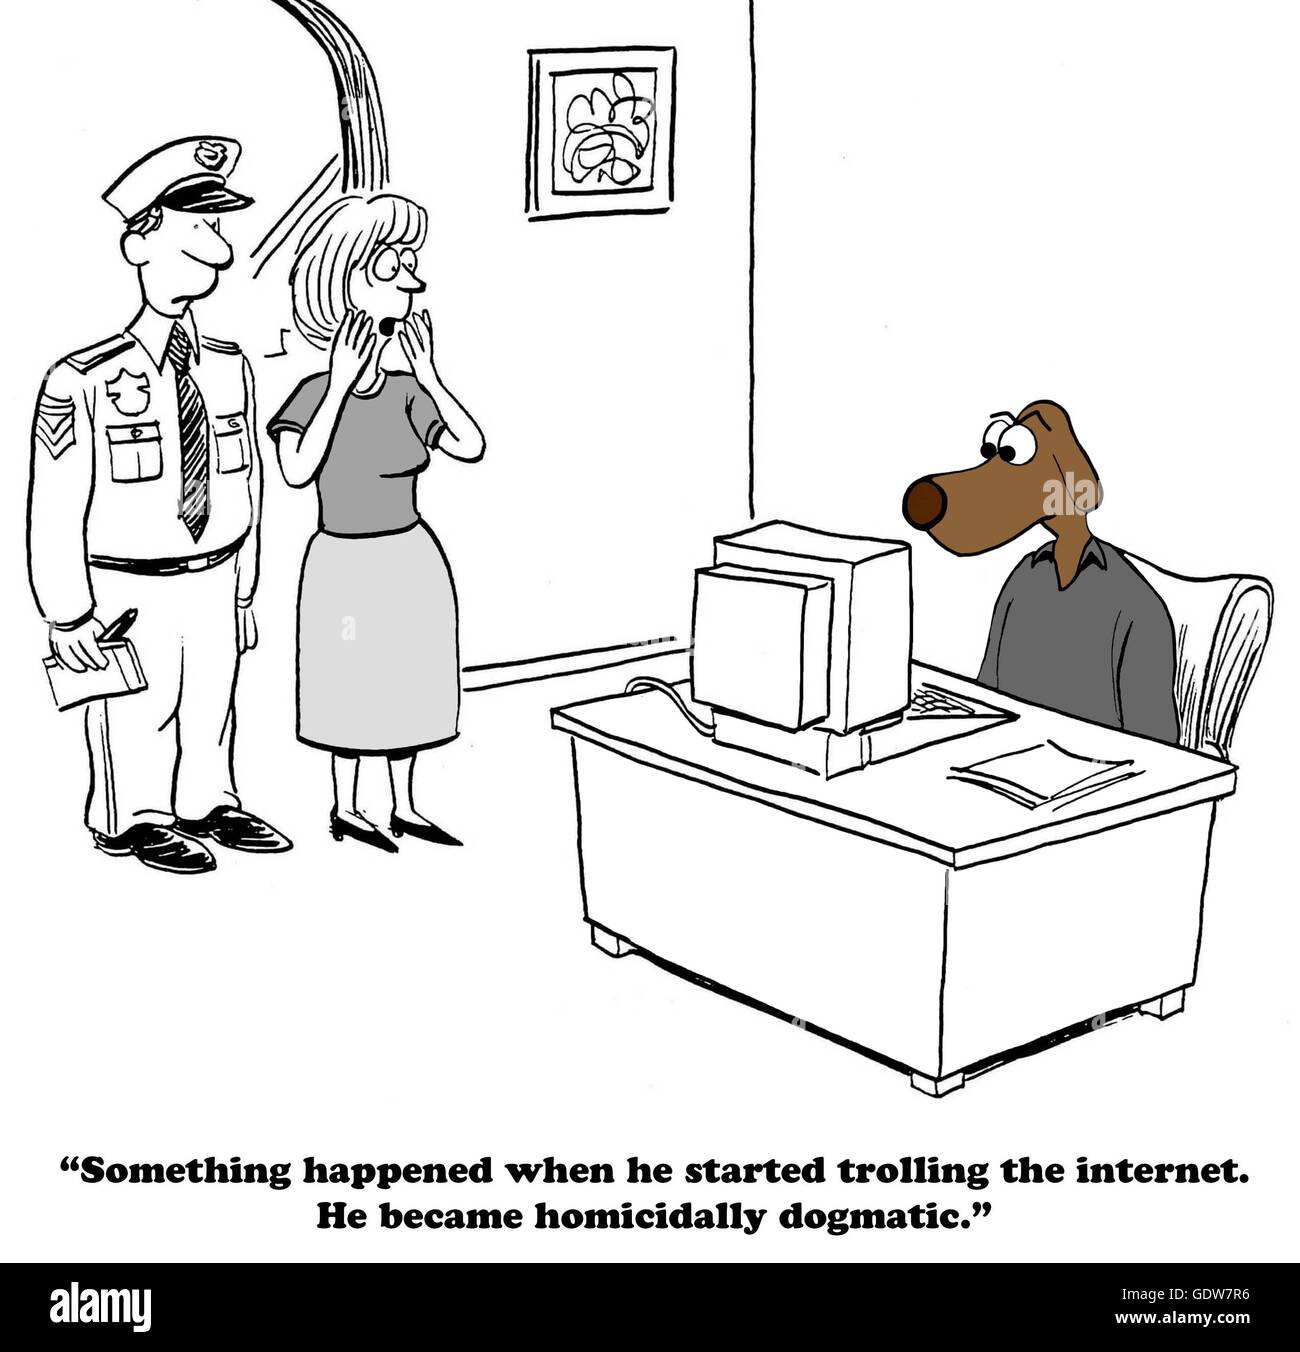 Cartoon about dogmatic behavior on the internet. Stock Photo